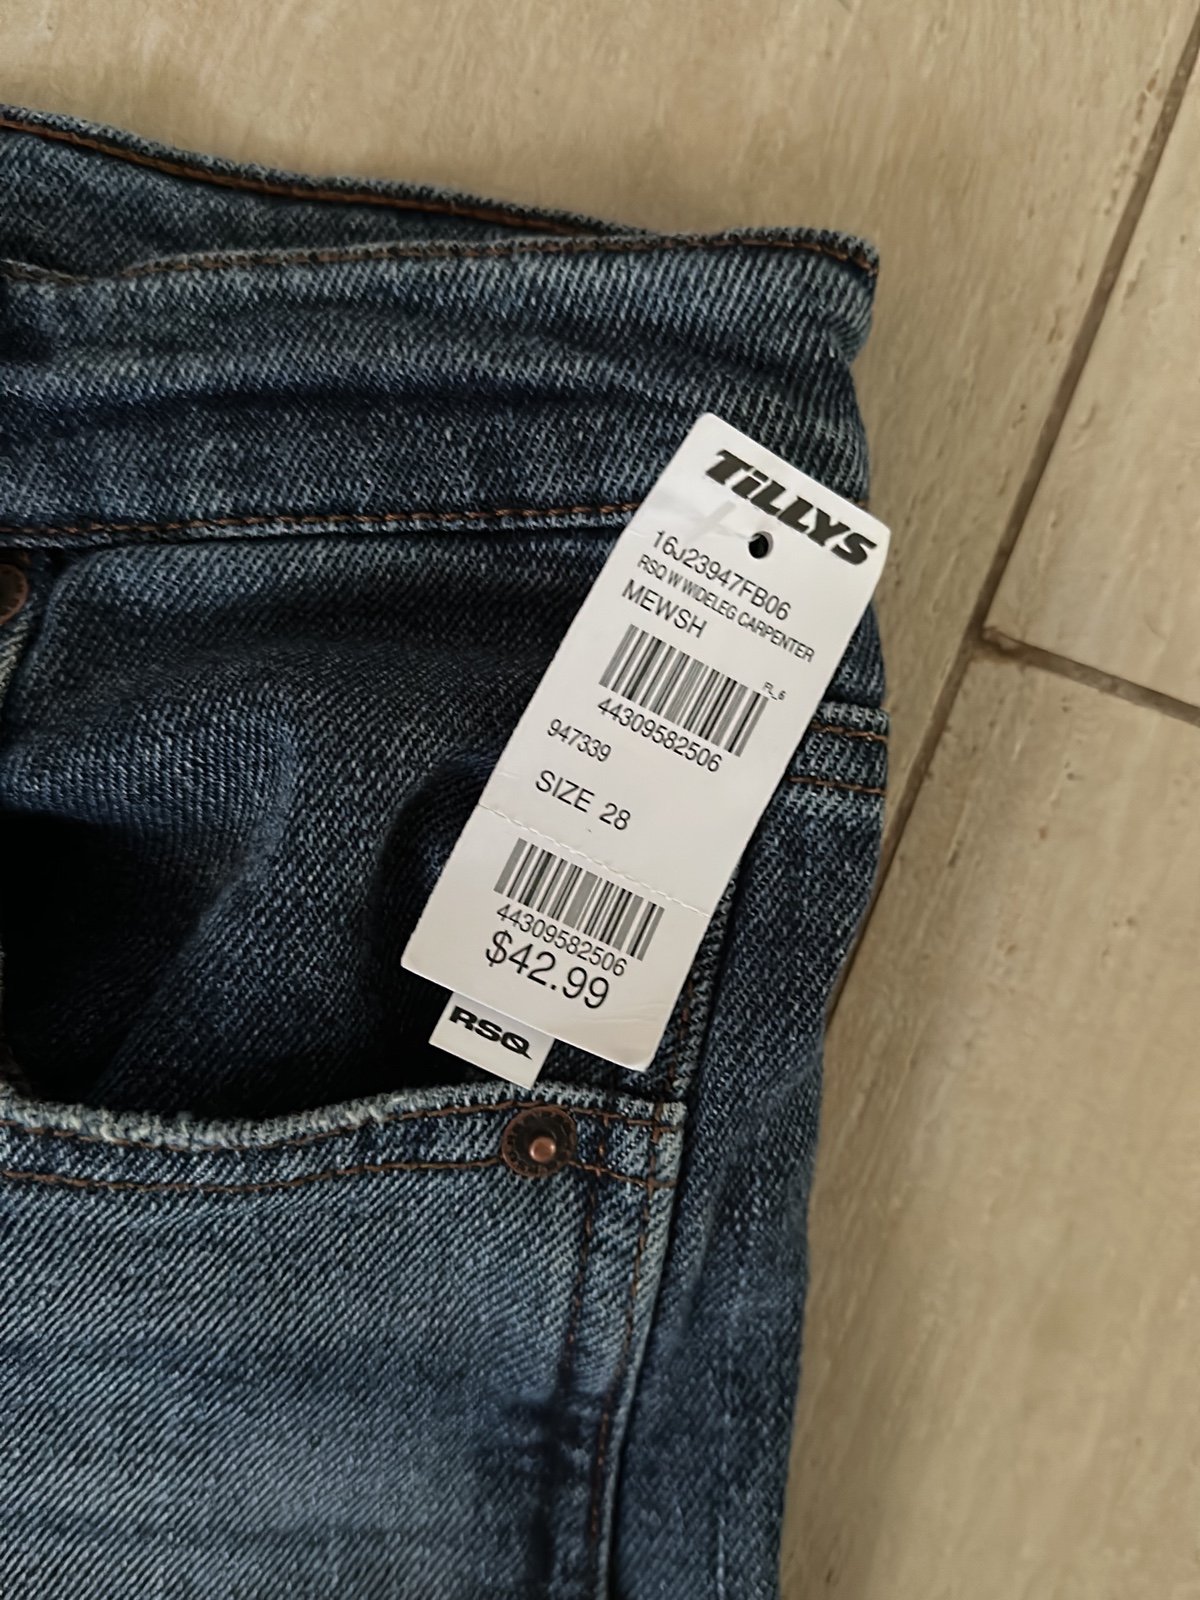 where to buy  RSQ Cargo Jeans KFr7I0w4R no tax